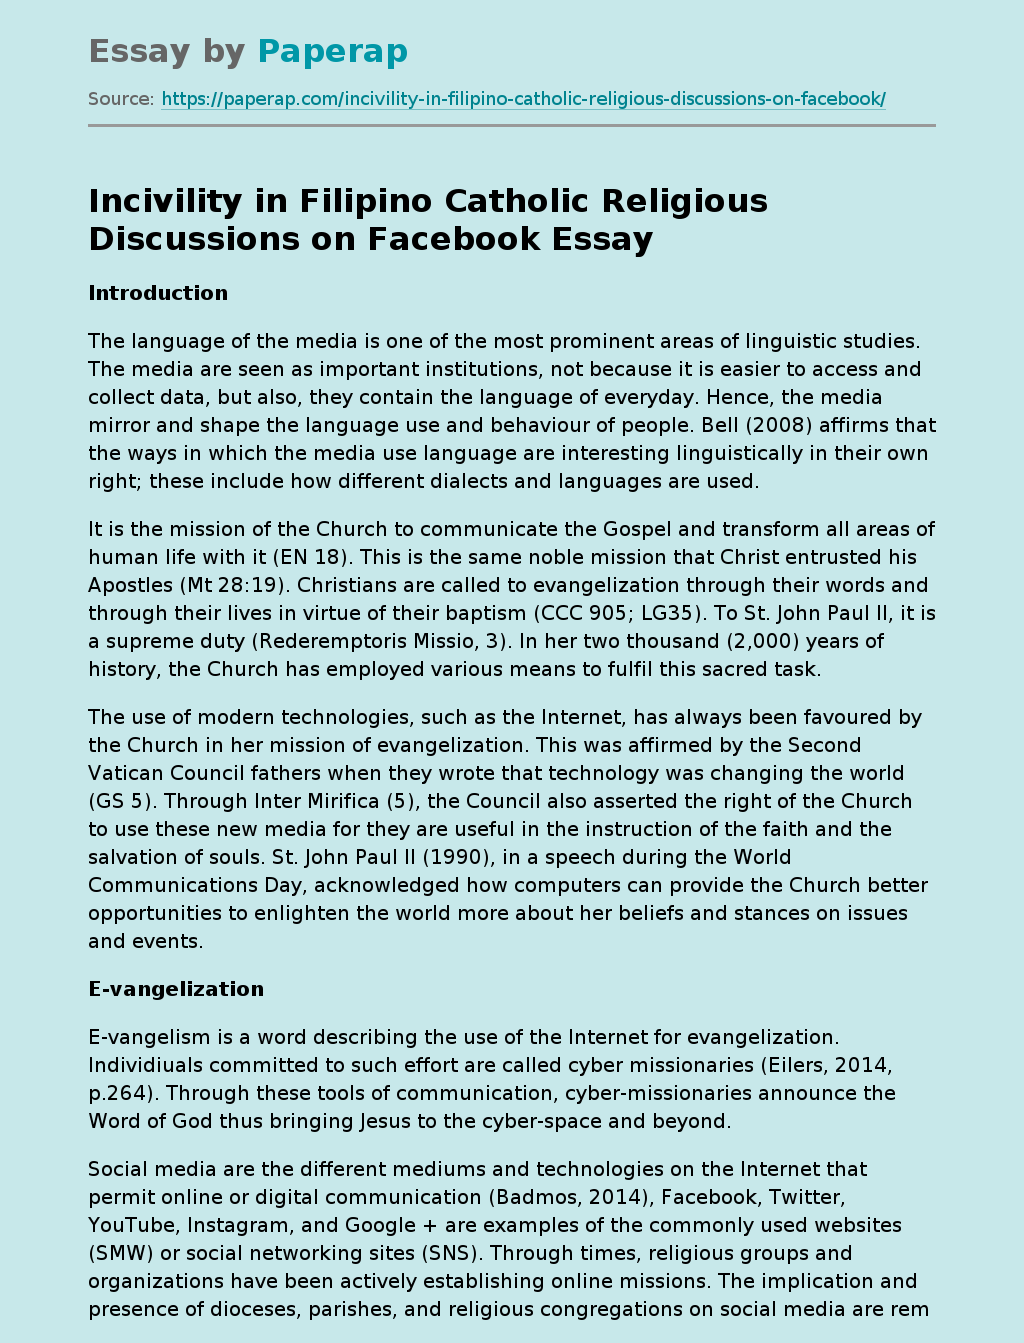 Incivility in Filipino Catholic Religious Discussions on Facebook